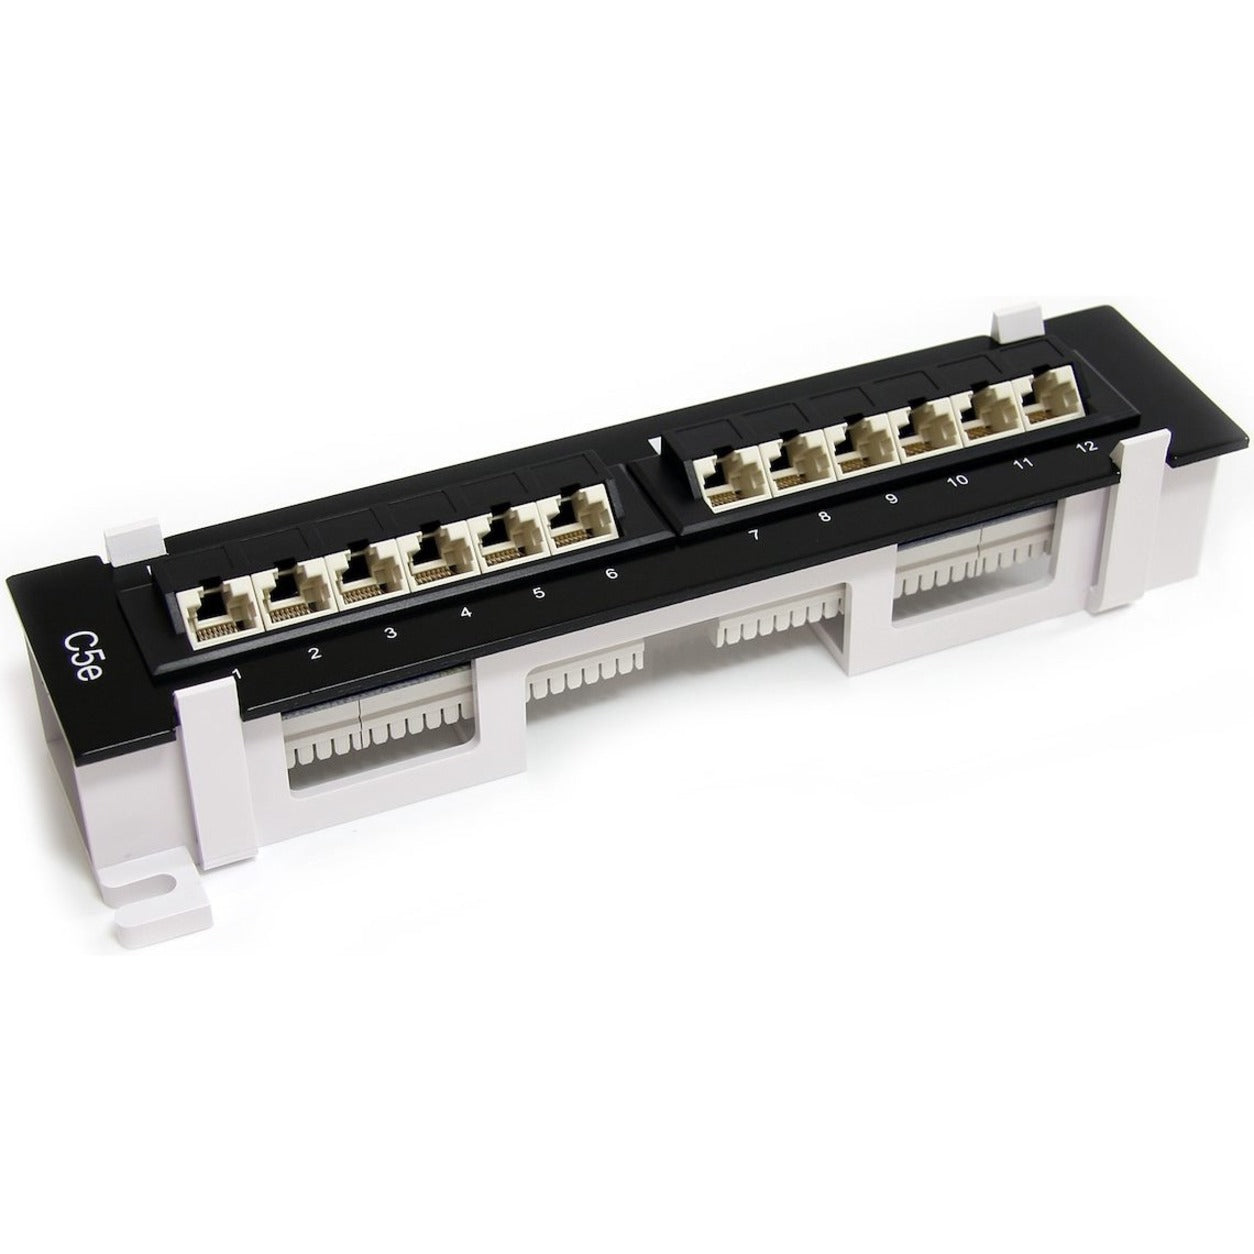 StarTech.com PANEL4512 1U 12 Port Wall Mount Cat5e 110 Patch Panel - 45 Degree, T568A and T568B Wiring